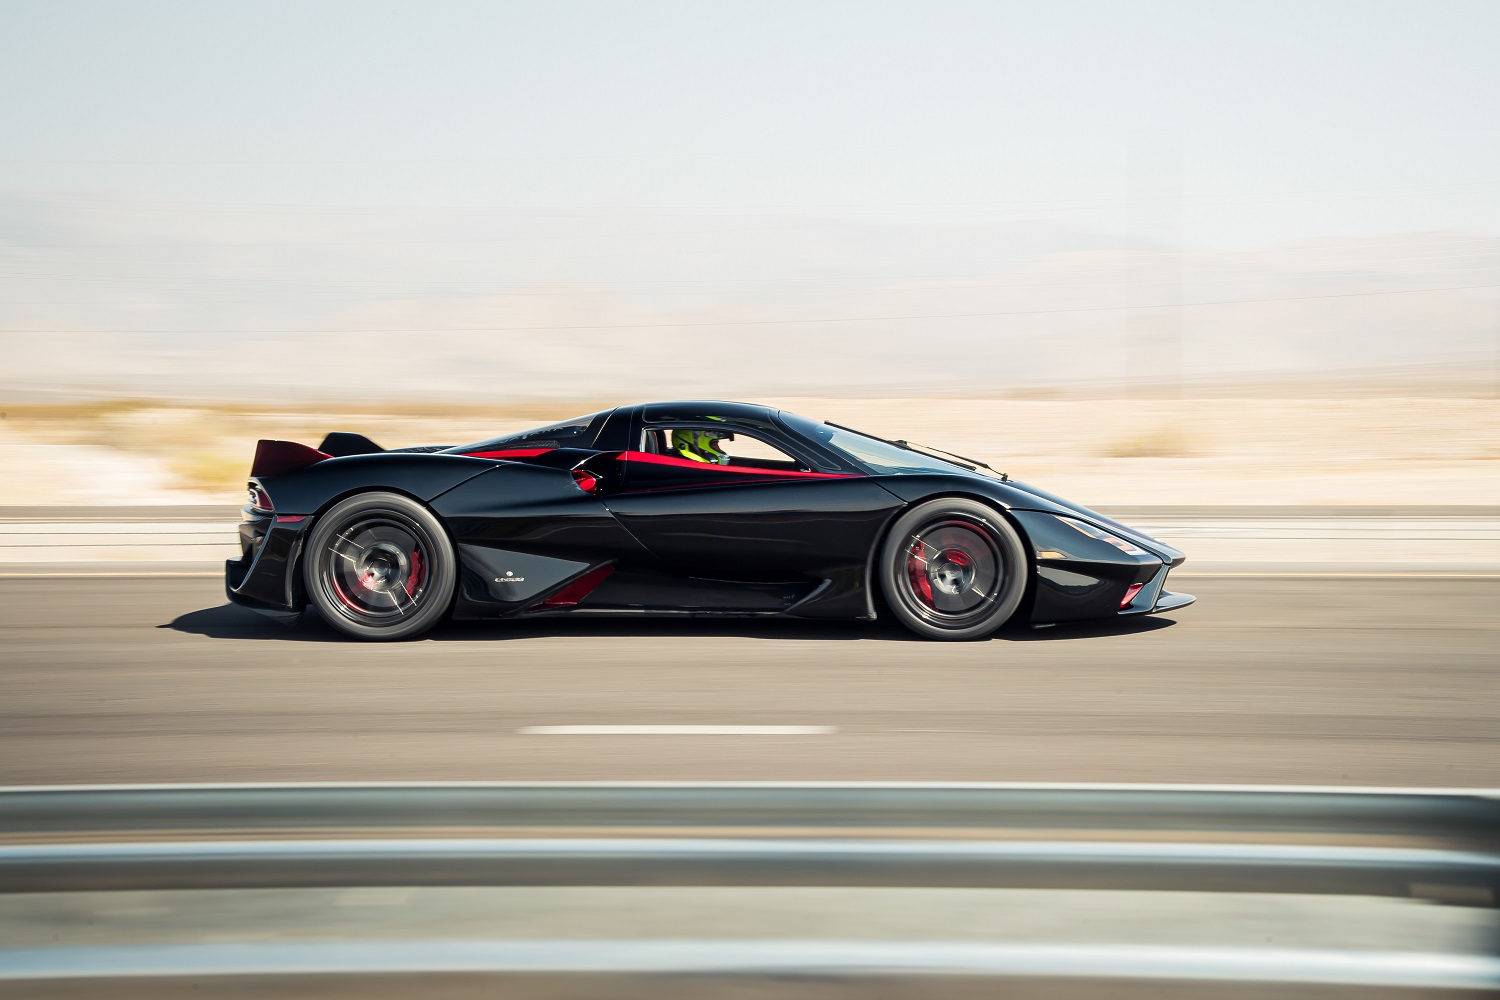 Fastest Camera Cars in the World 